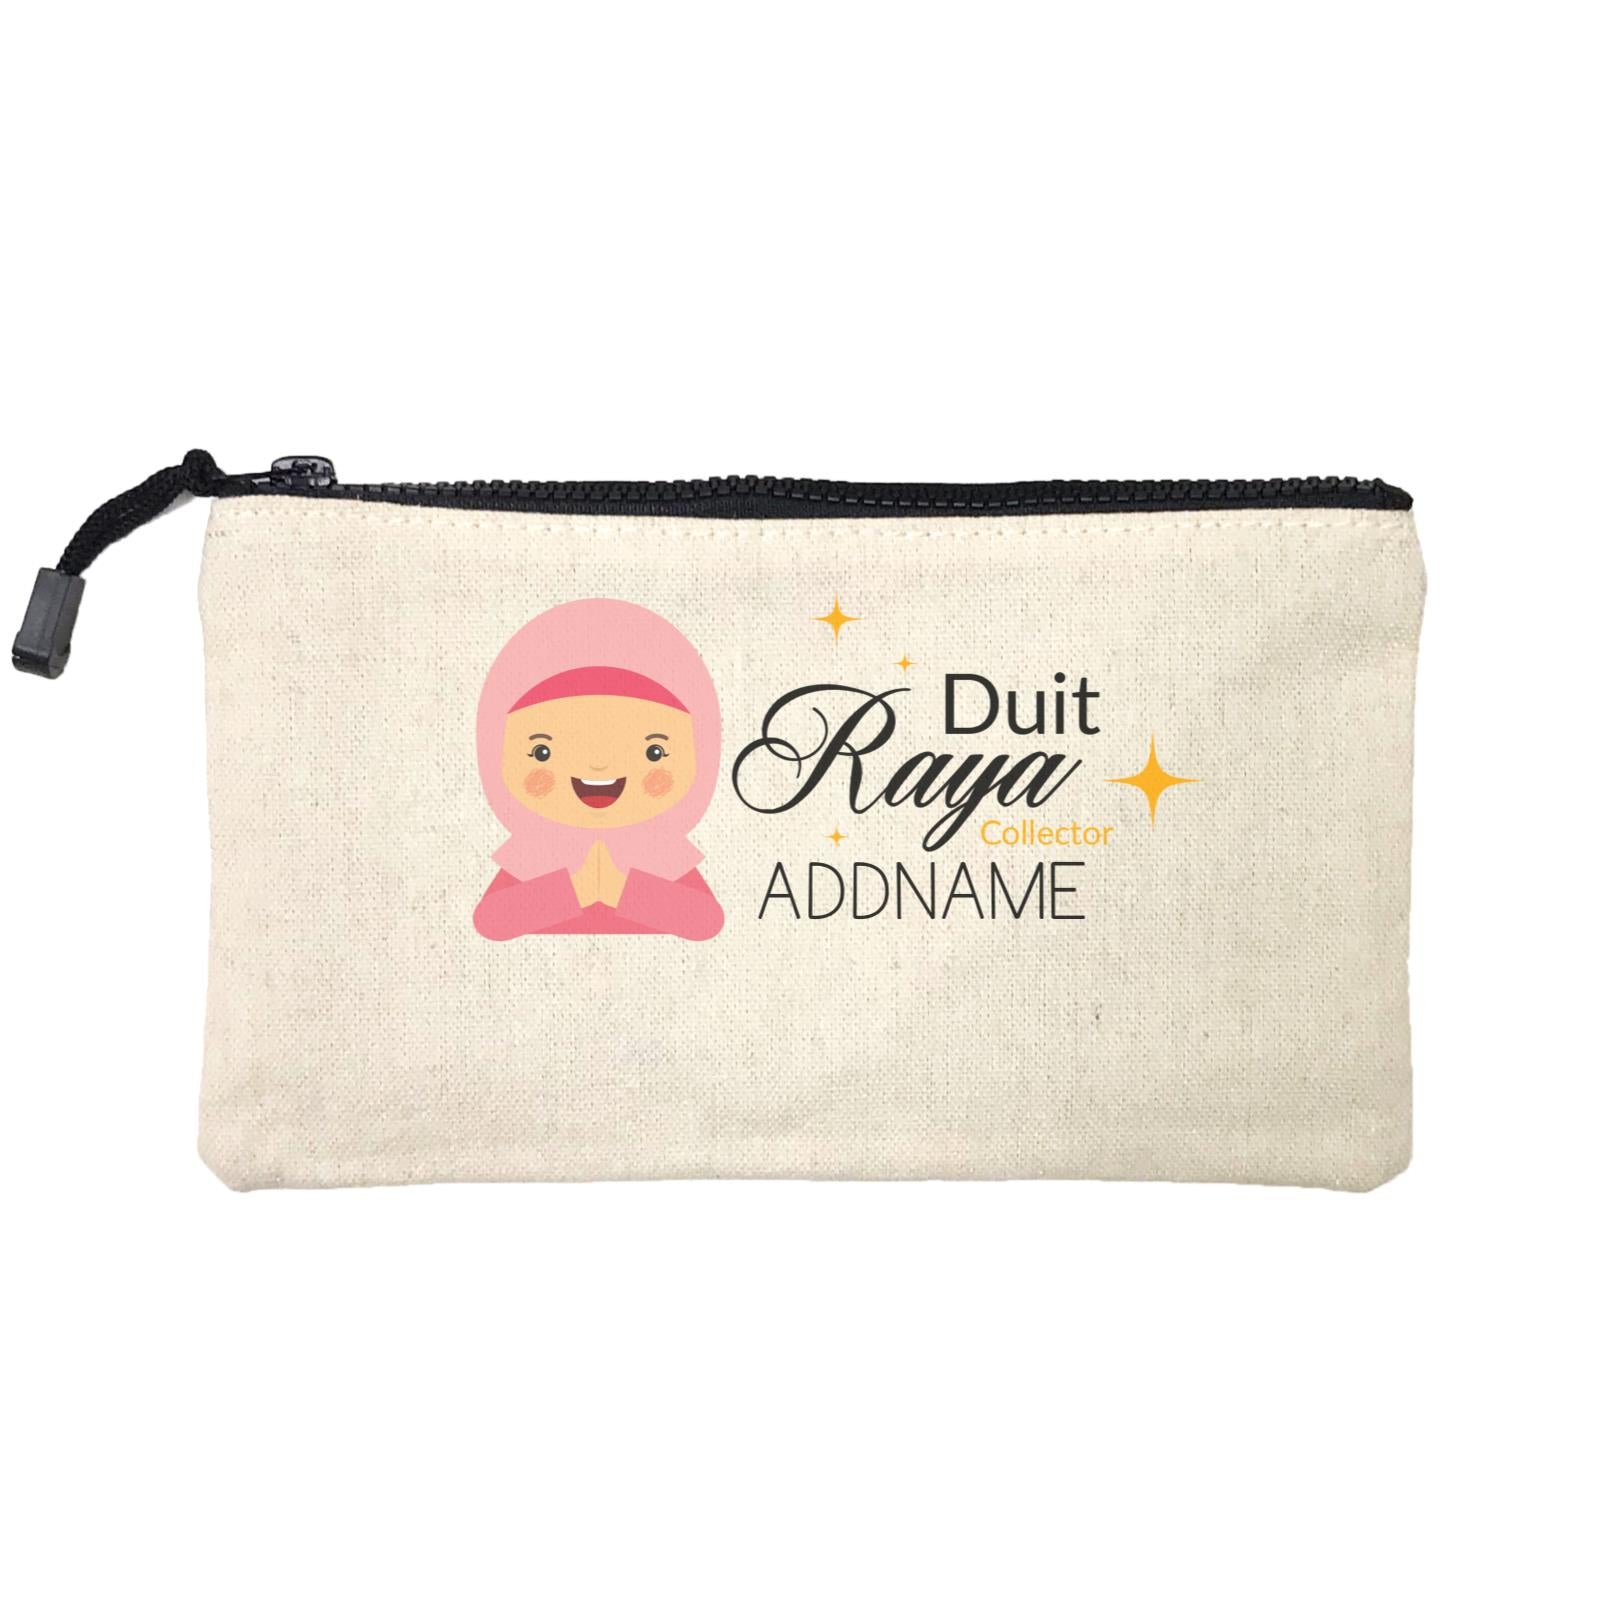 Duit Raya Collector Lady Addname Mini Accessories Stationery Pouch